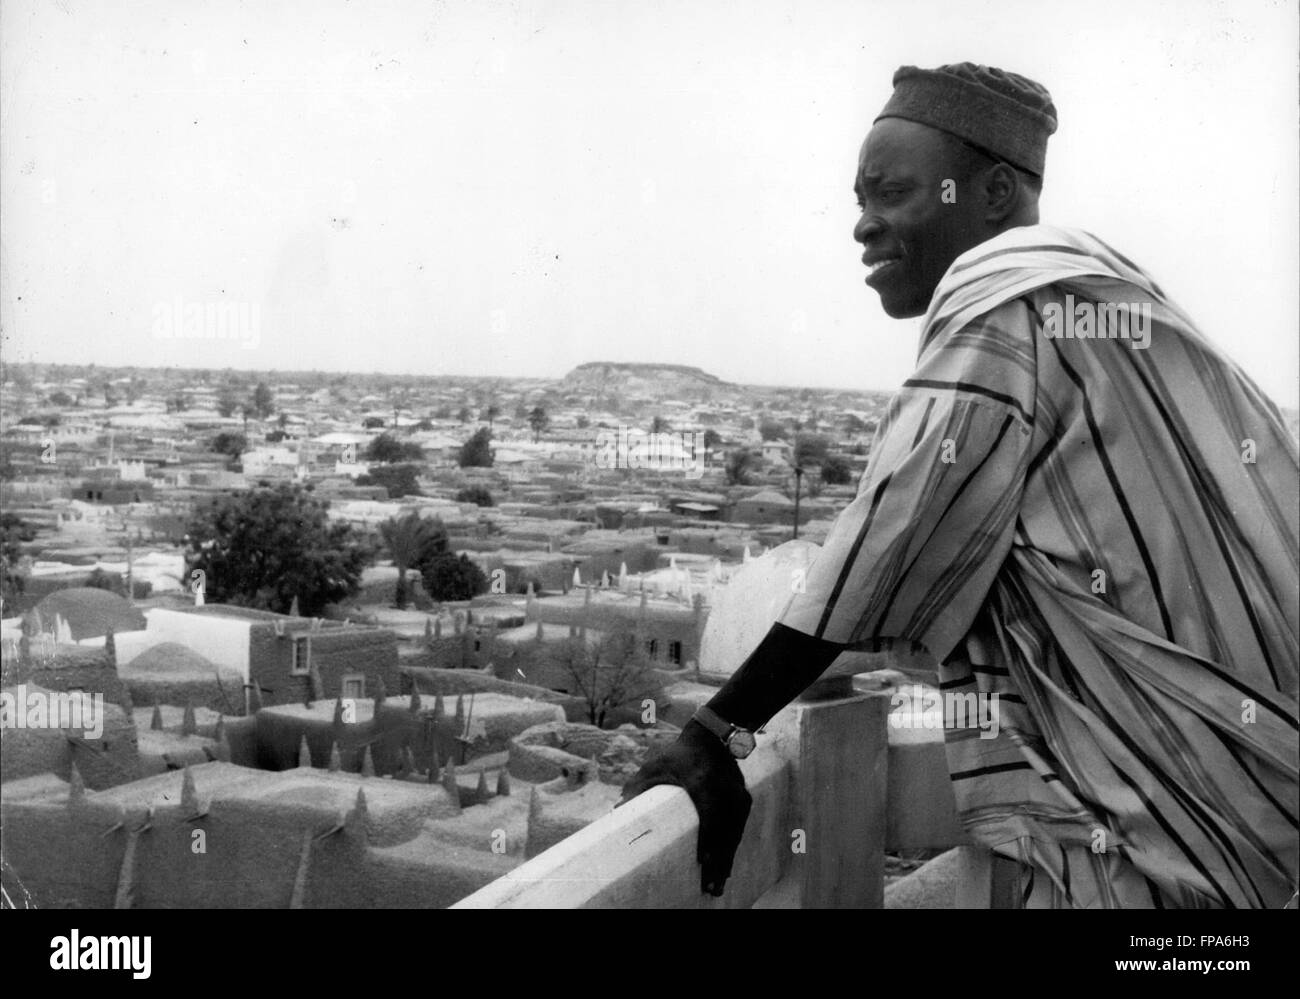 1962 - Northern Nigeria: Kano From the great Mosque, A Kano citizen Survey the City from a Minaret of the Great Mosque © Keystone Pictures USA/ZUMAPRESS.com/Alamy Live News Stock Photo